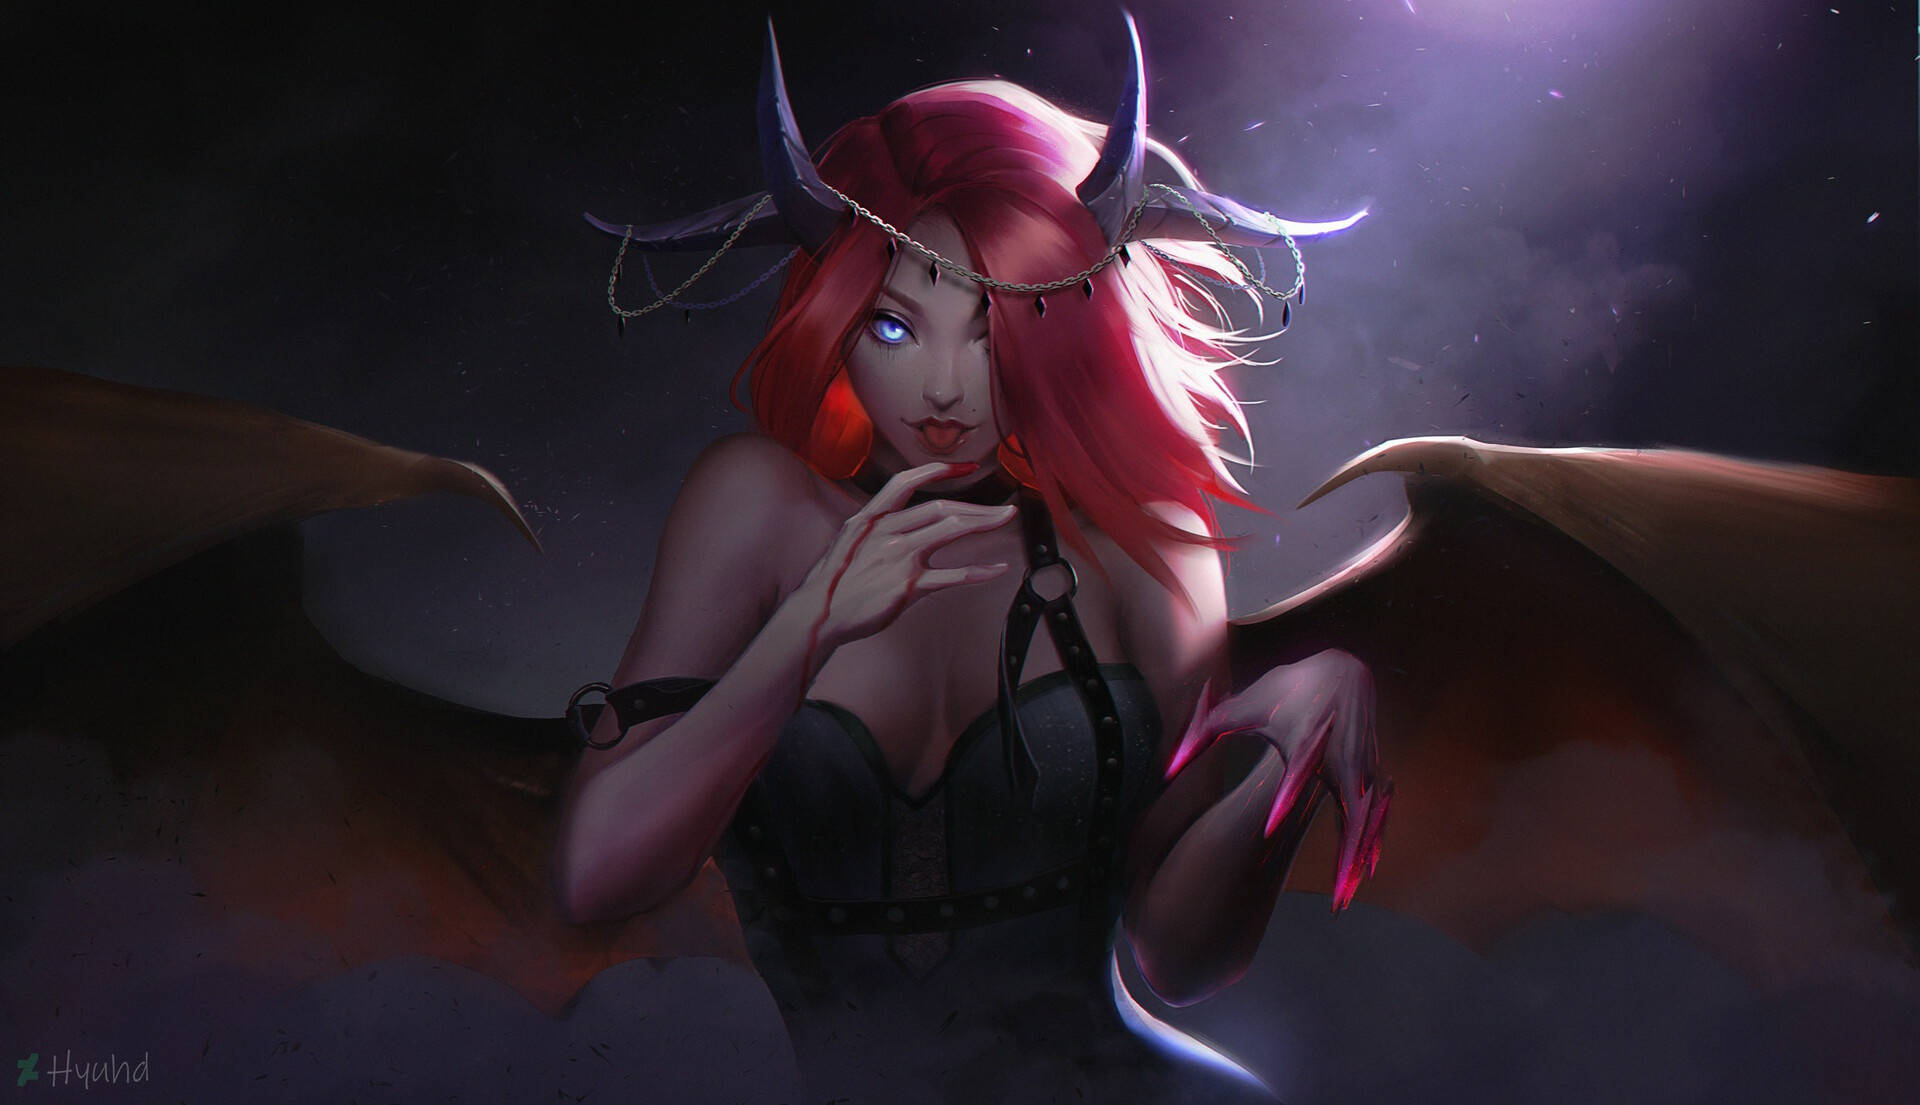 Redhead Succubus With Bloody Fingers Wallpaper